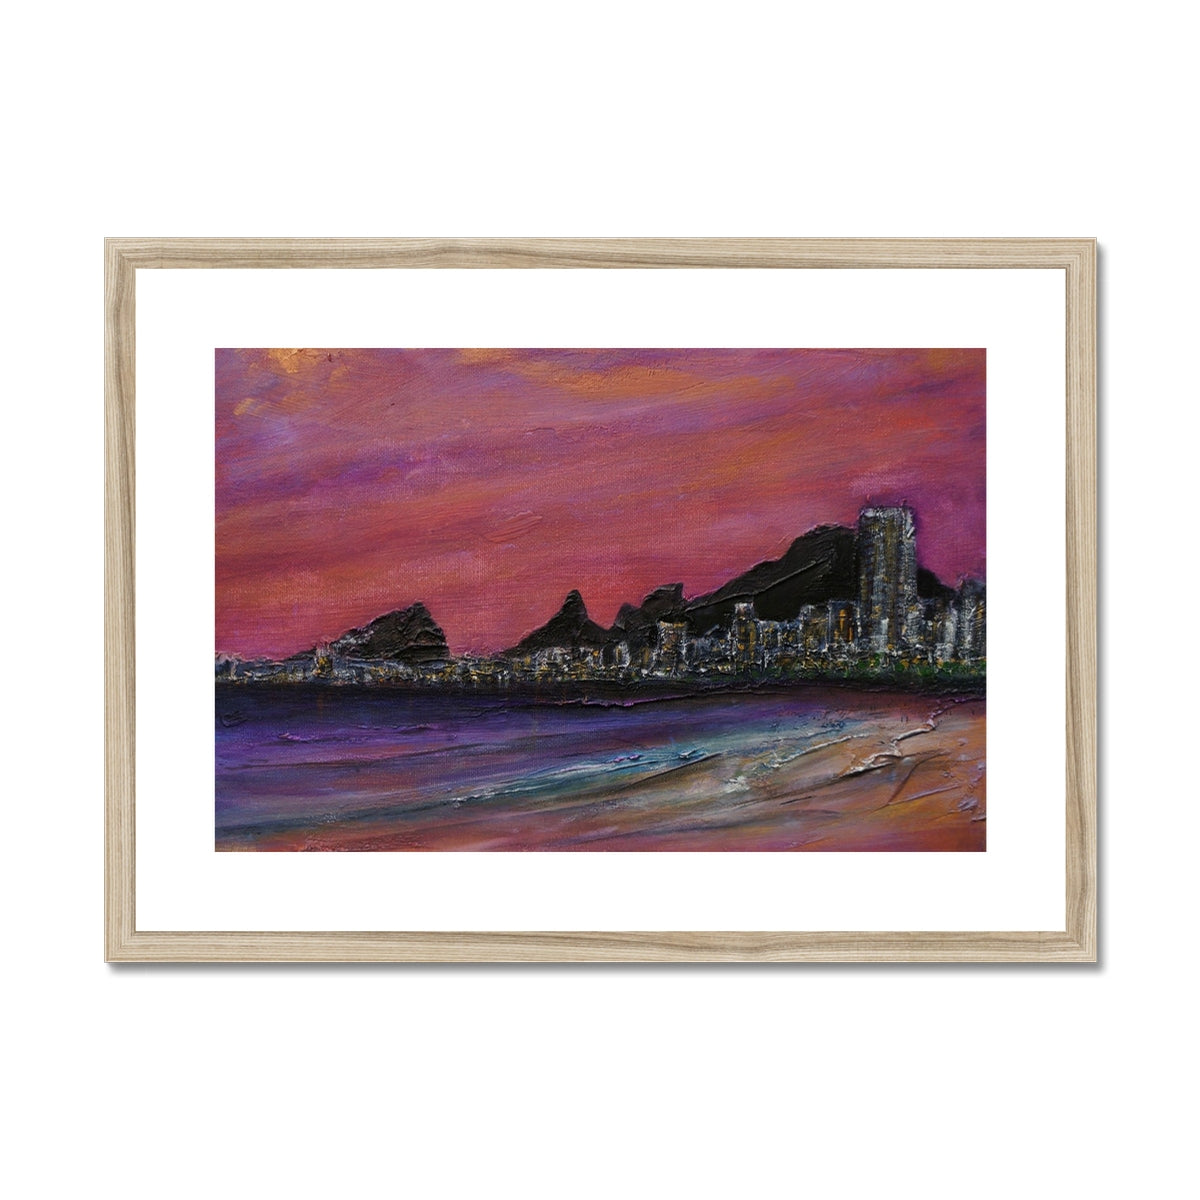 Copacabana Beach Dusk Painting | Framed & Mounted Prints From Scotland-Framed & Mounted Prints-World Art Gallery-A2 Landscape-Natural Frame-Paintings, Prints, Homeware, Art Gifts From Scotland By Scottish Artist Kevin Hunter